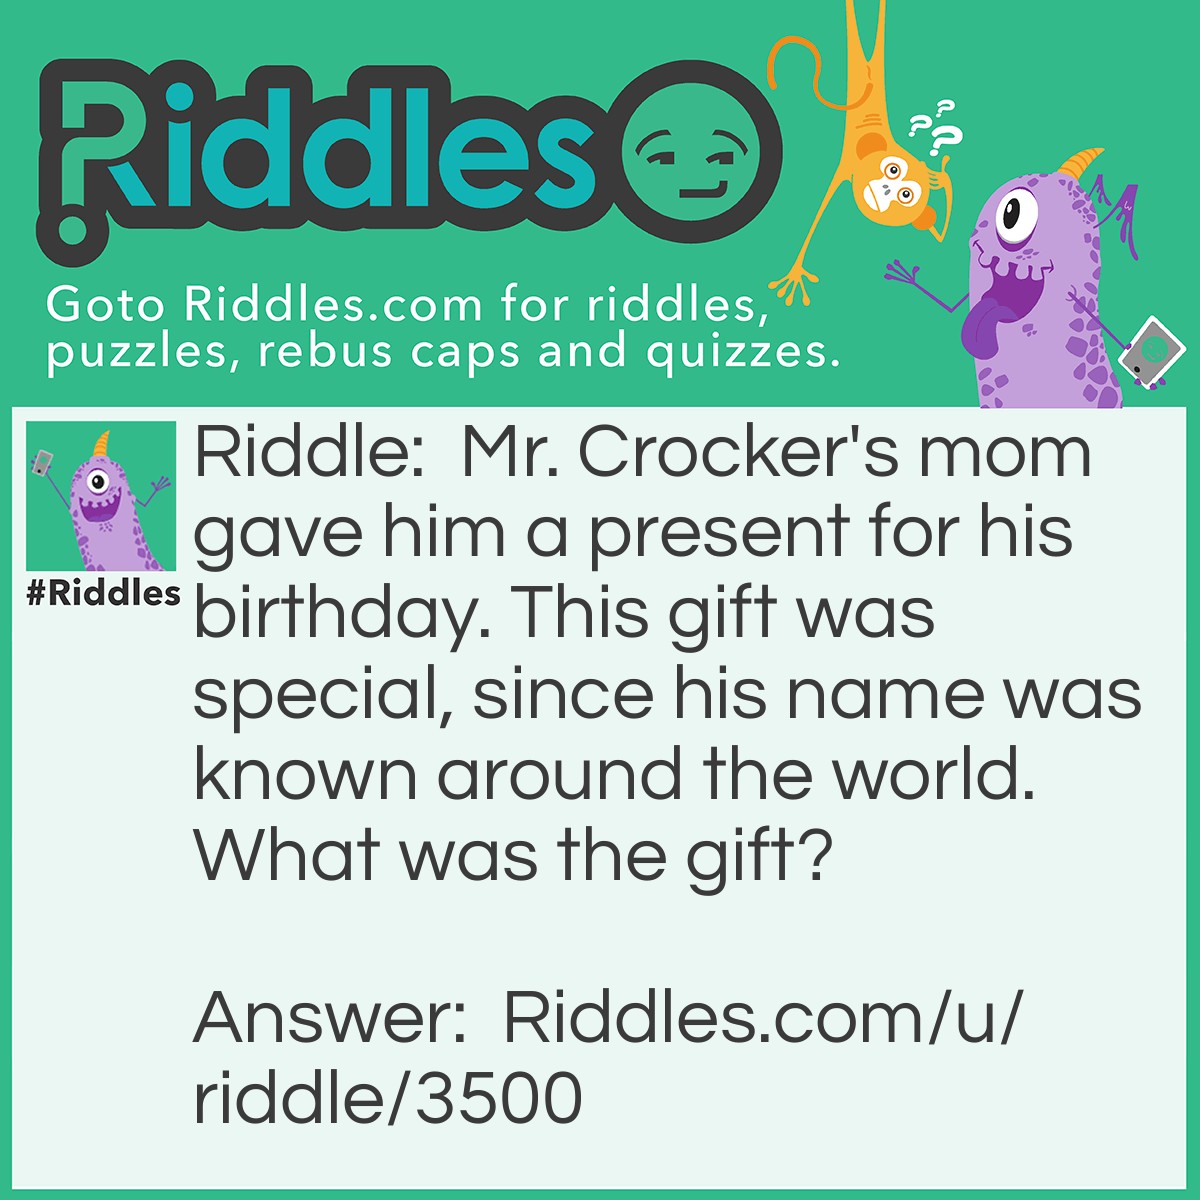 Riddle: Mr. Crocker's mom gave him a present for his birthday. This gift was special, since his name was known around the world. What was the gift? Answer: A Crock-pot.